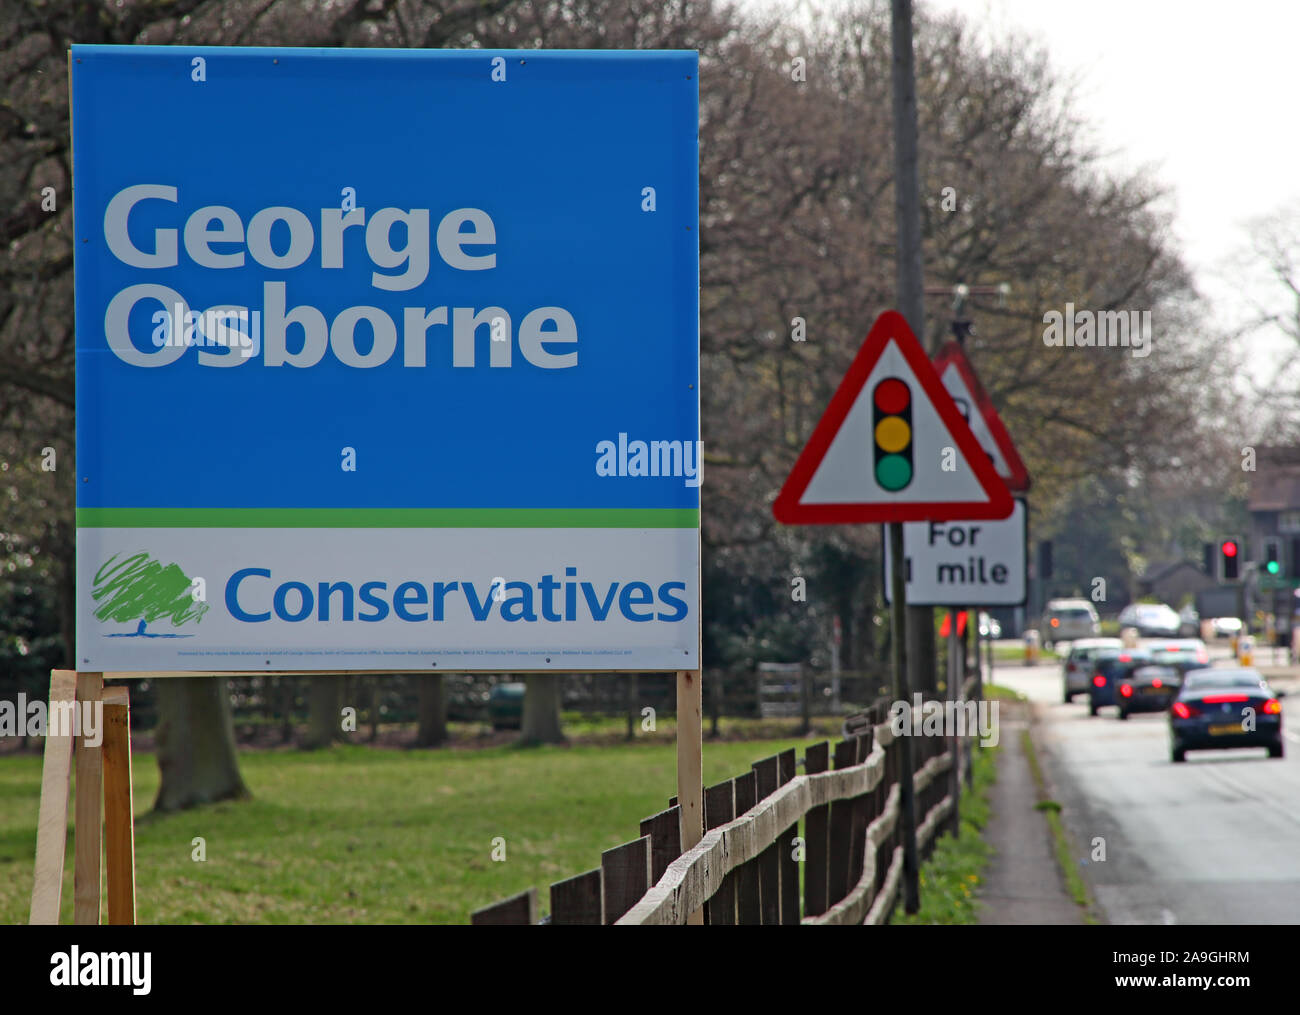 George Osborne Conservatives  election poster, Tatton constituancy 2010 General Election, Mere, Knutsford, Cheshire, England, UK, WA16 6LJ Stock Photo